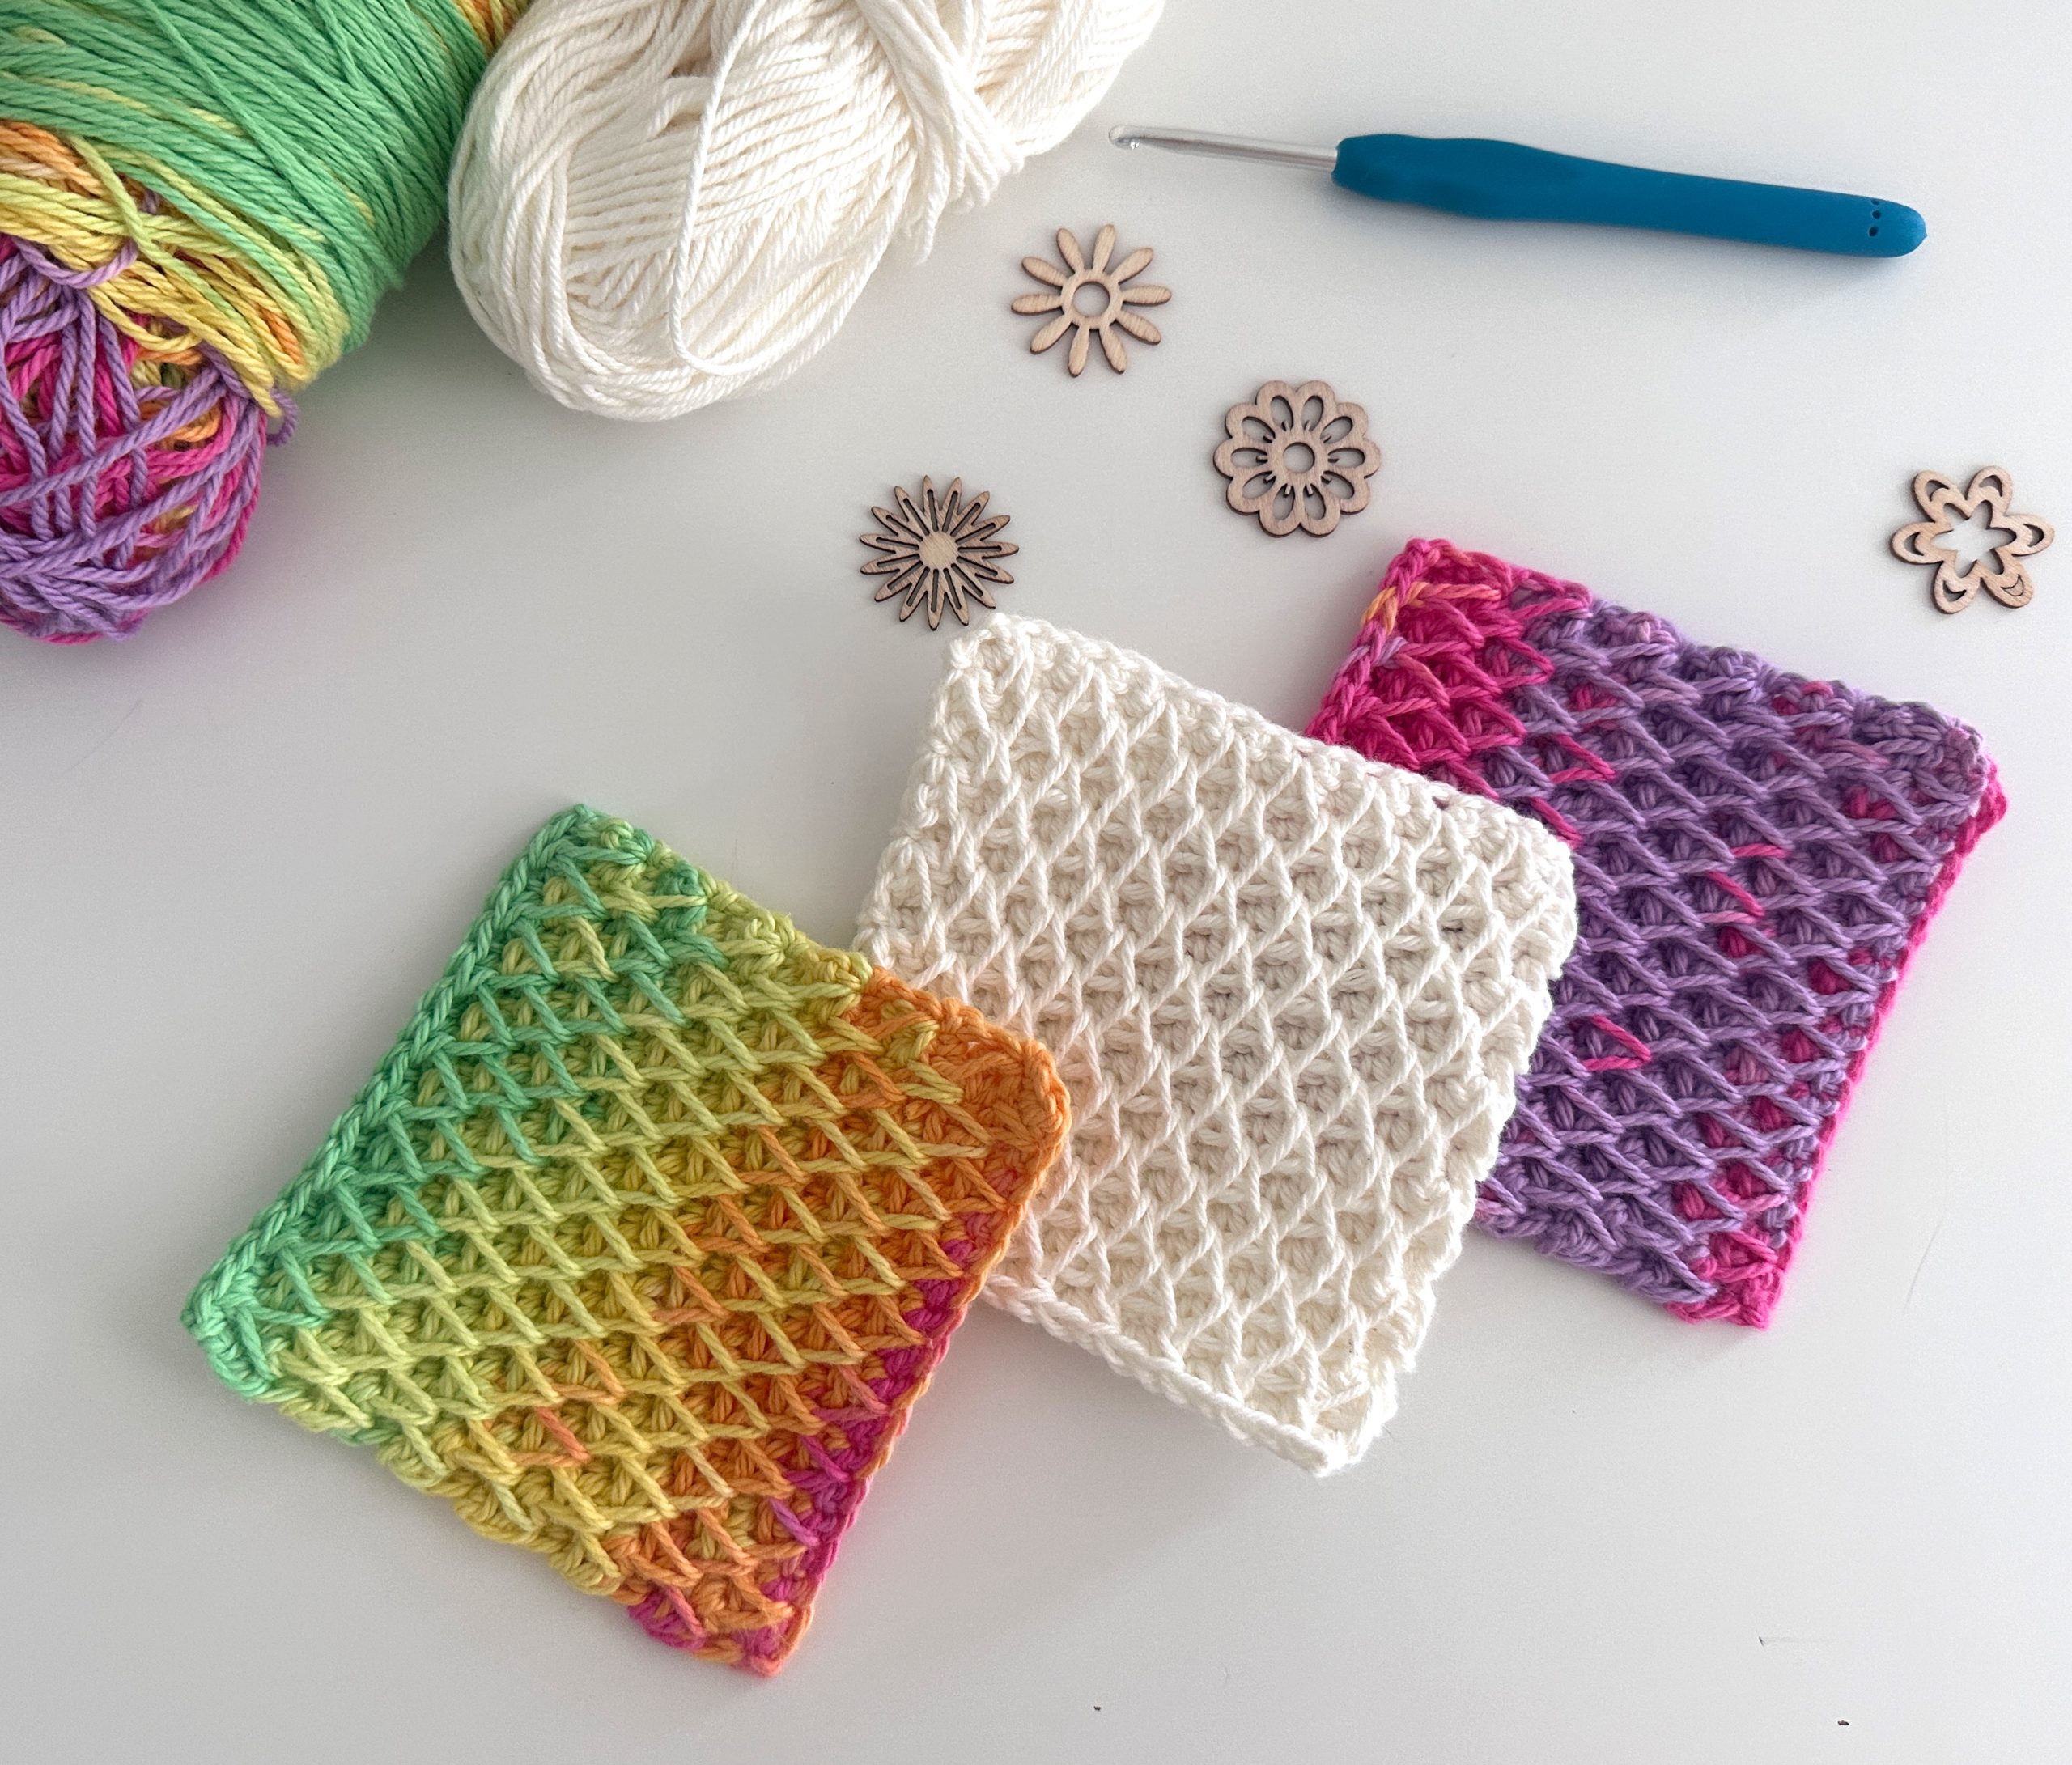 How to Cross-Stitch with Patterns: DIY Chevron Coasters